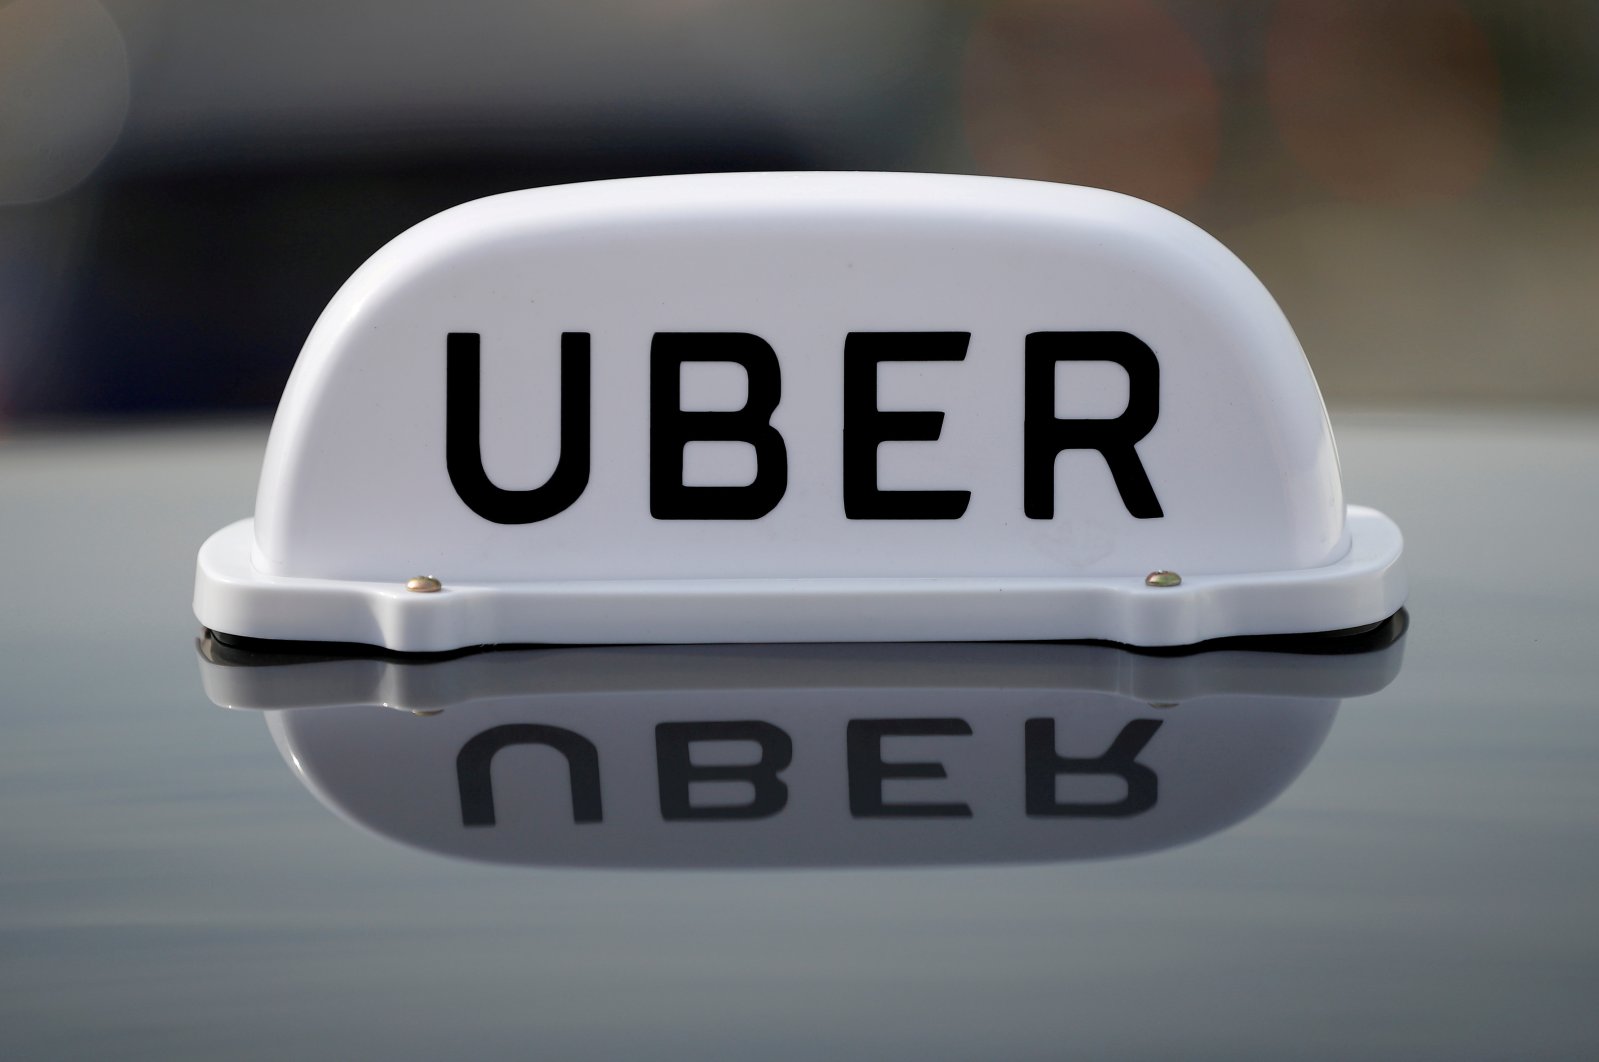 The logo of taxi company Uber is seen on the roof of a private hire taxi in Liverpool, U.K., April 15, 2019. (Reuters Photo)